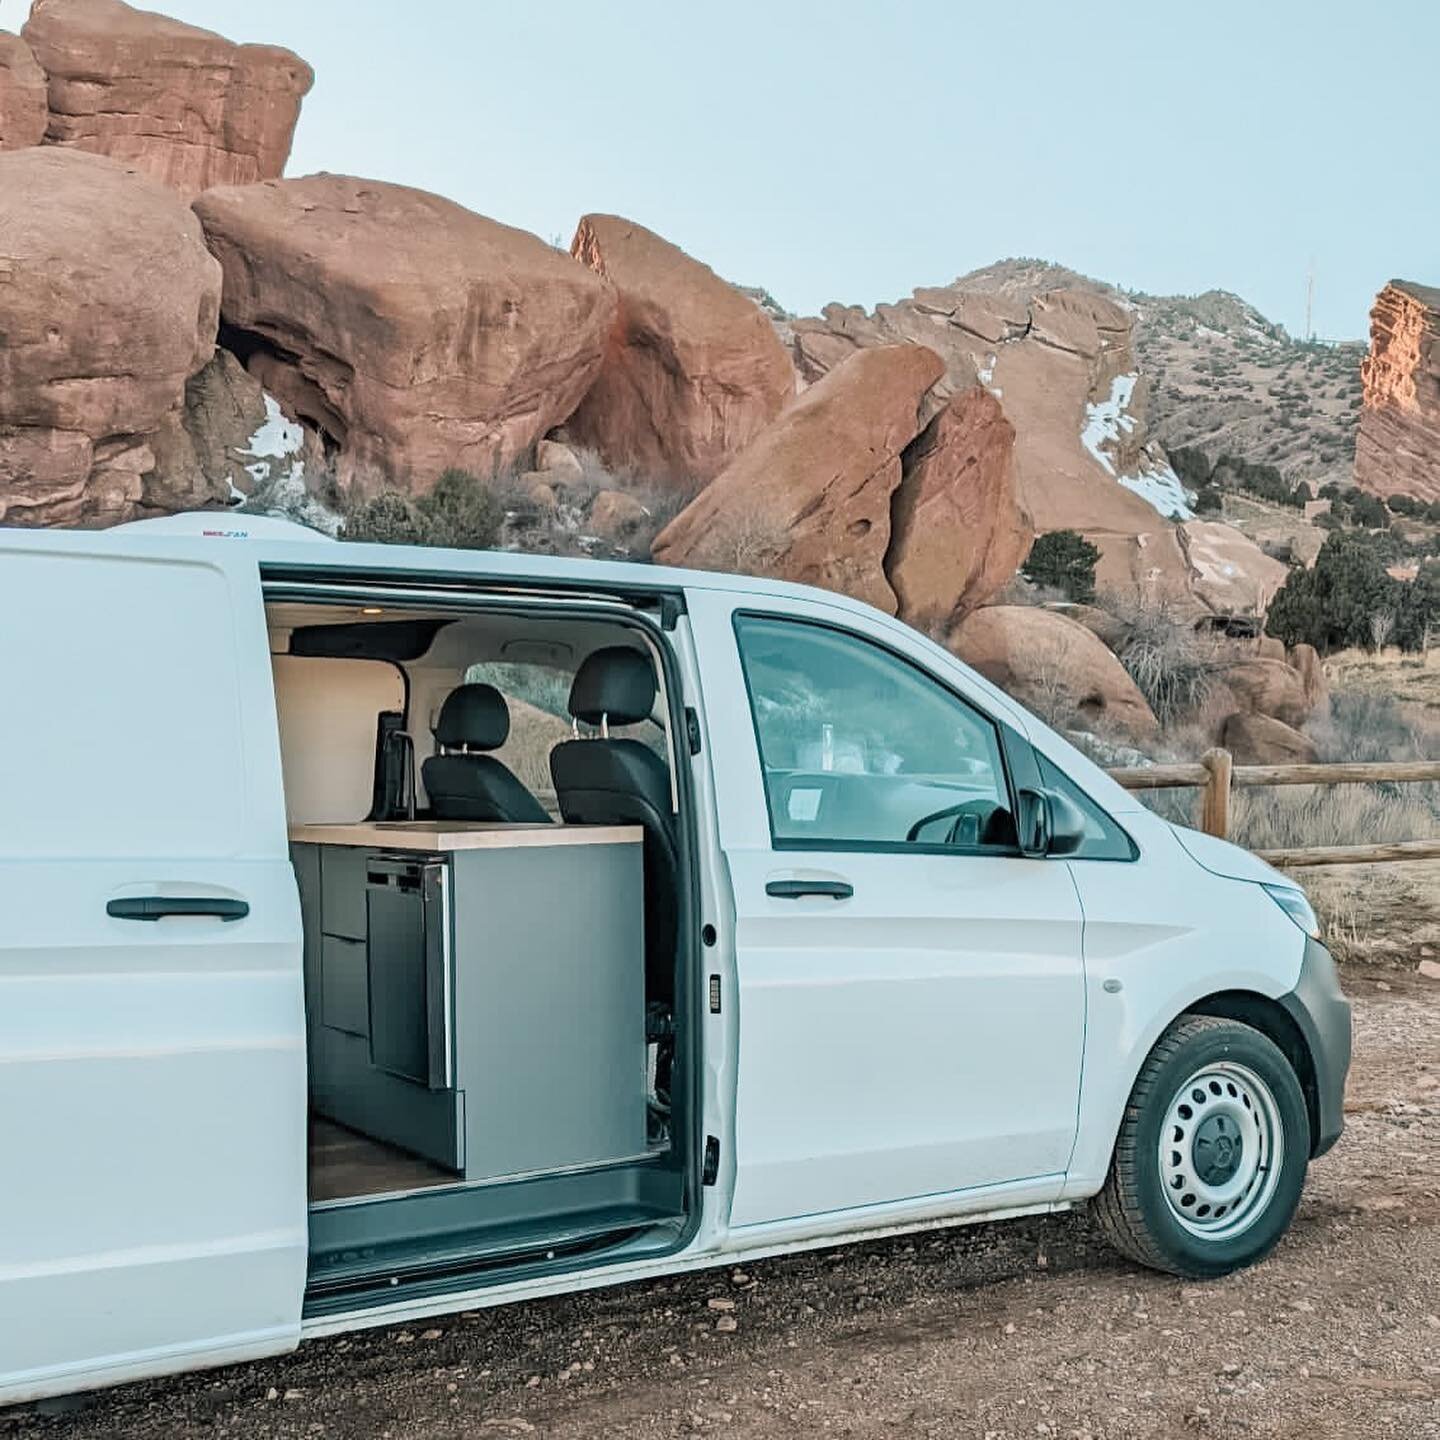 We love our Mercedes Metris! Easily convertible bed, Dometic fridge, electric water pump, and more. Oh, did I mention it&rsquo;s for sale?!
.
.
.
.
.
#vanlifeisthegoodlife #vanlifemoments  #homeiswhereyouparkit #vanlifediaries #vanlifedistrict #campe